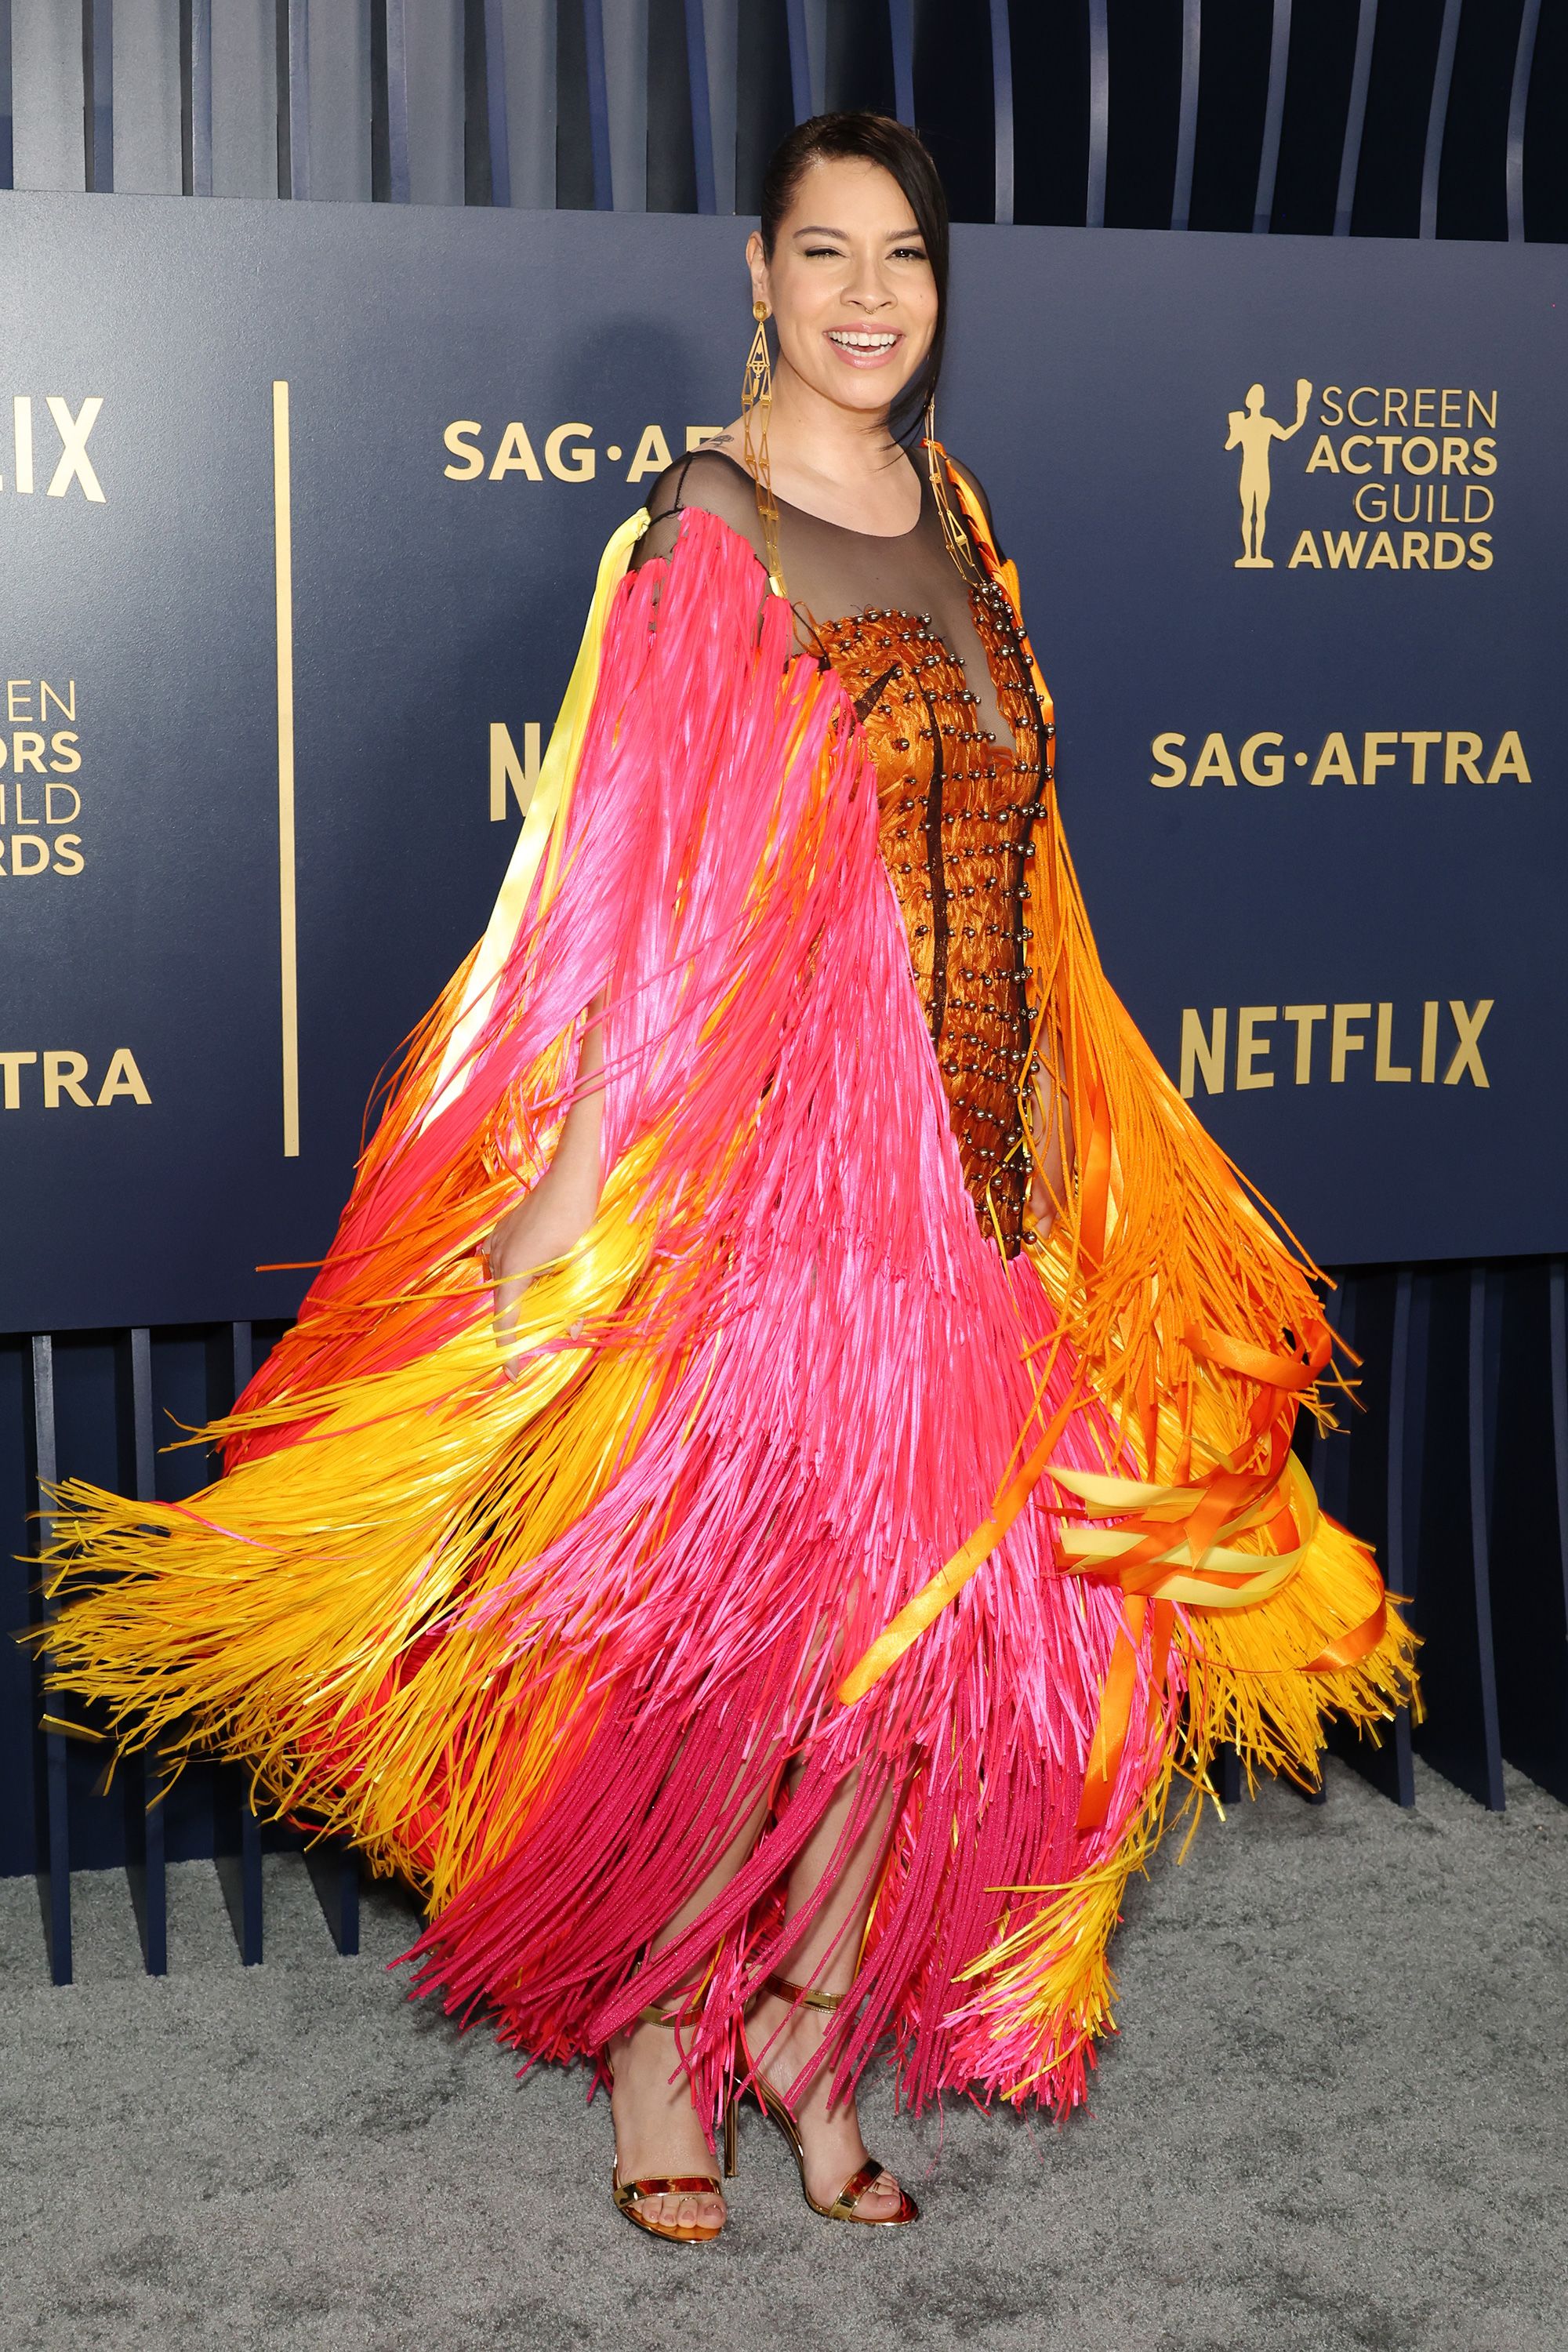 Gladstone's 'Killers of the Flower Moon' co-star Cara Jade Myers also donned colorful fringe.